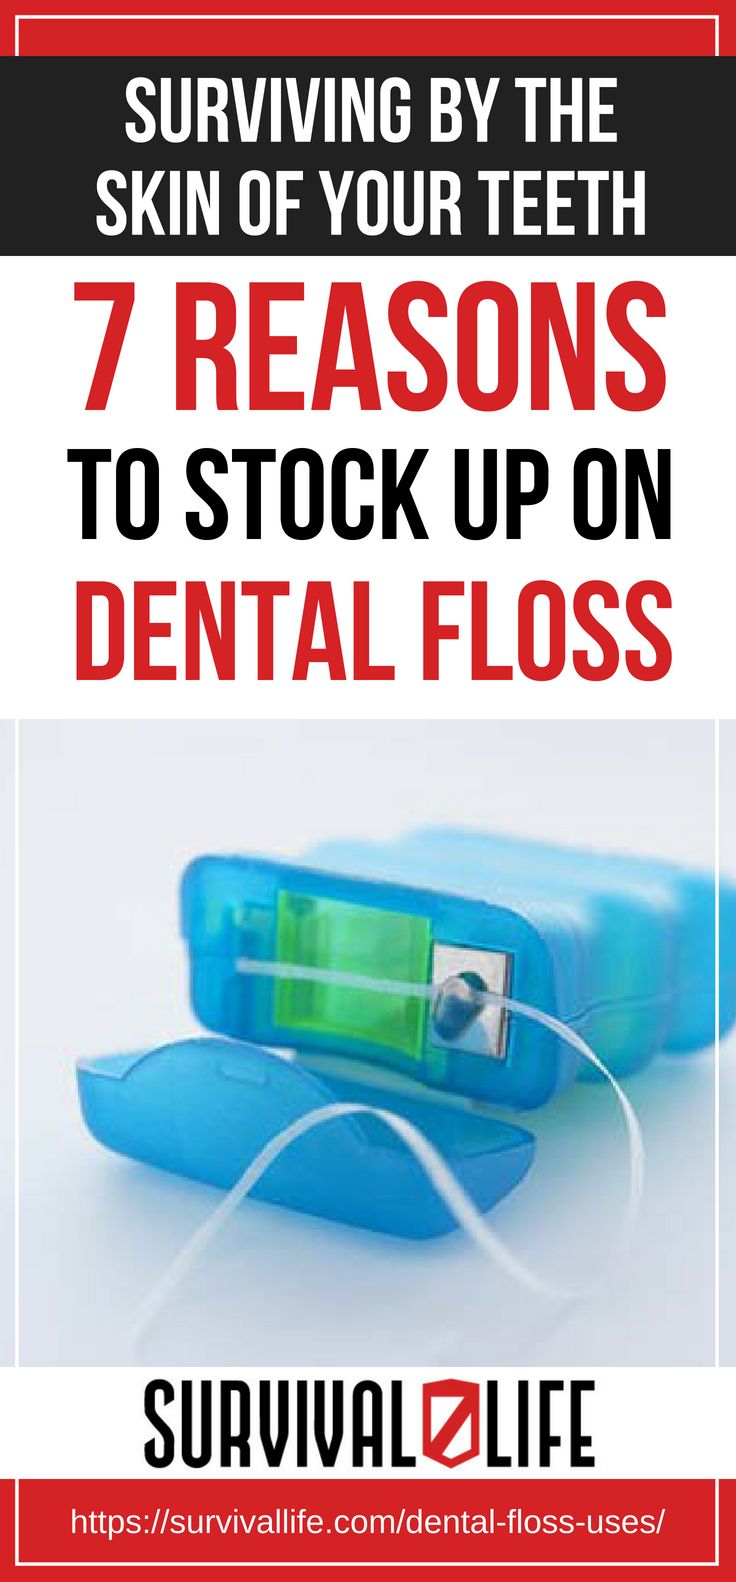 Placard | Surviving By The Skin Of Your Teeth: 7 Reasons To Stock Up On Dental Floss